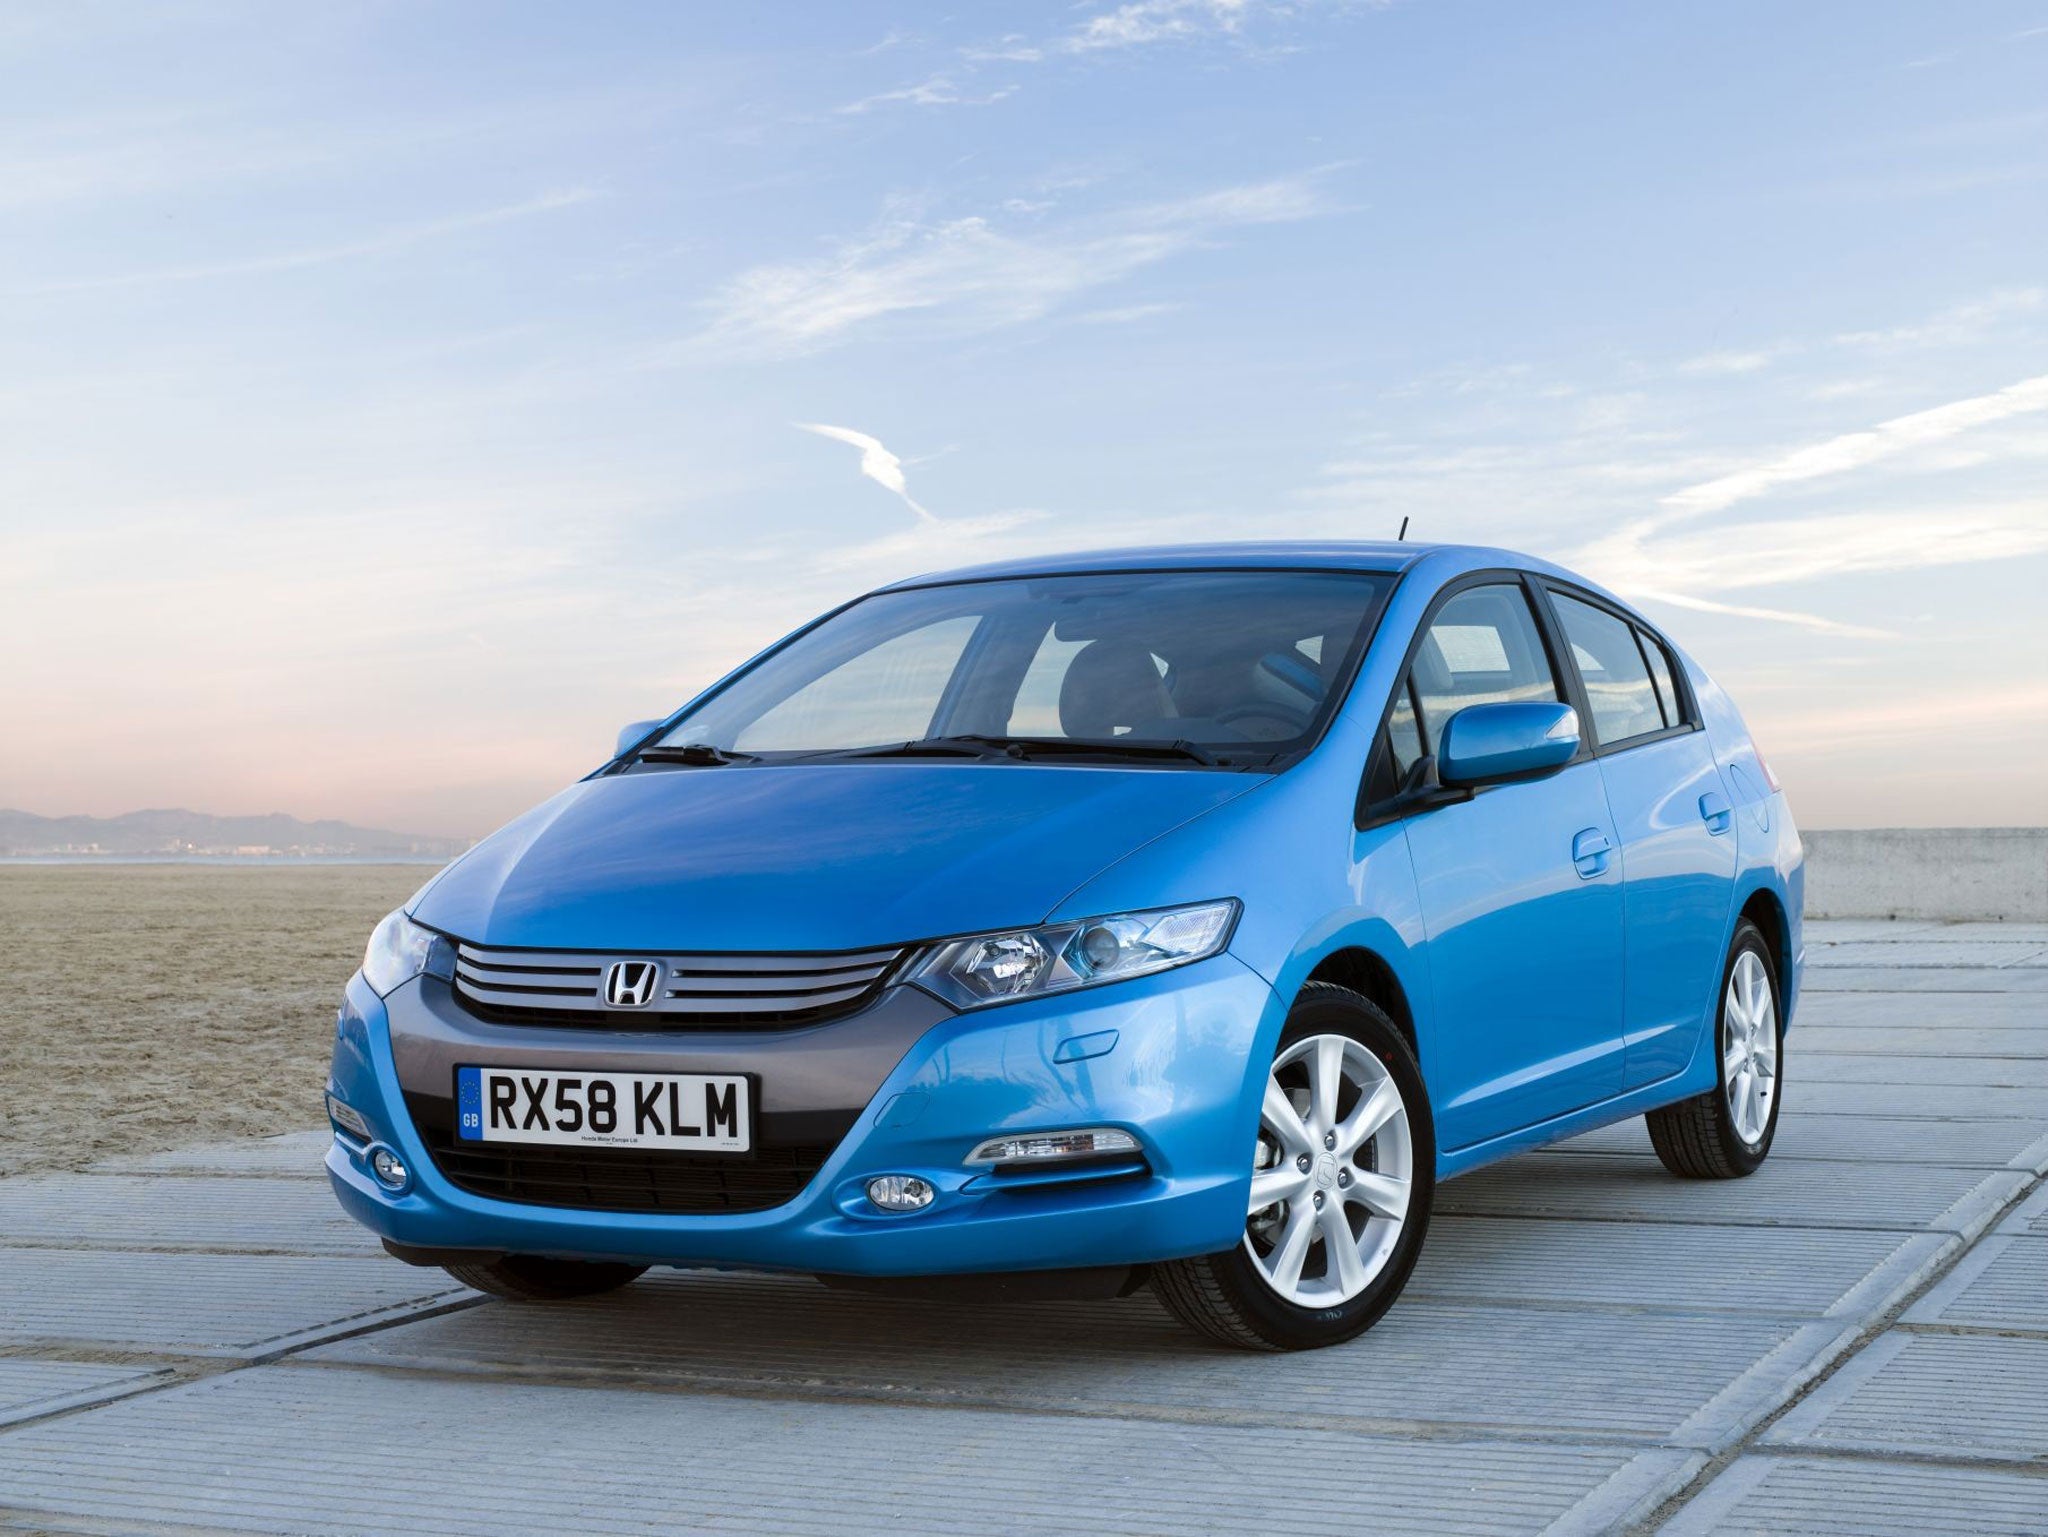 The Honda Insight 1.3 IMA is a hybrid with a small petrol and electric motor designed to work seamlessly with the automatic transmission